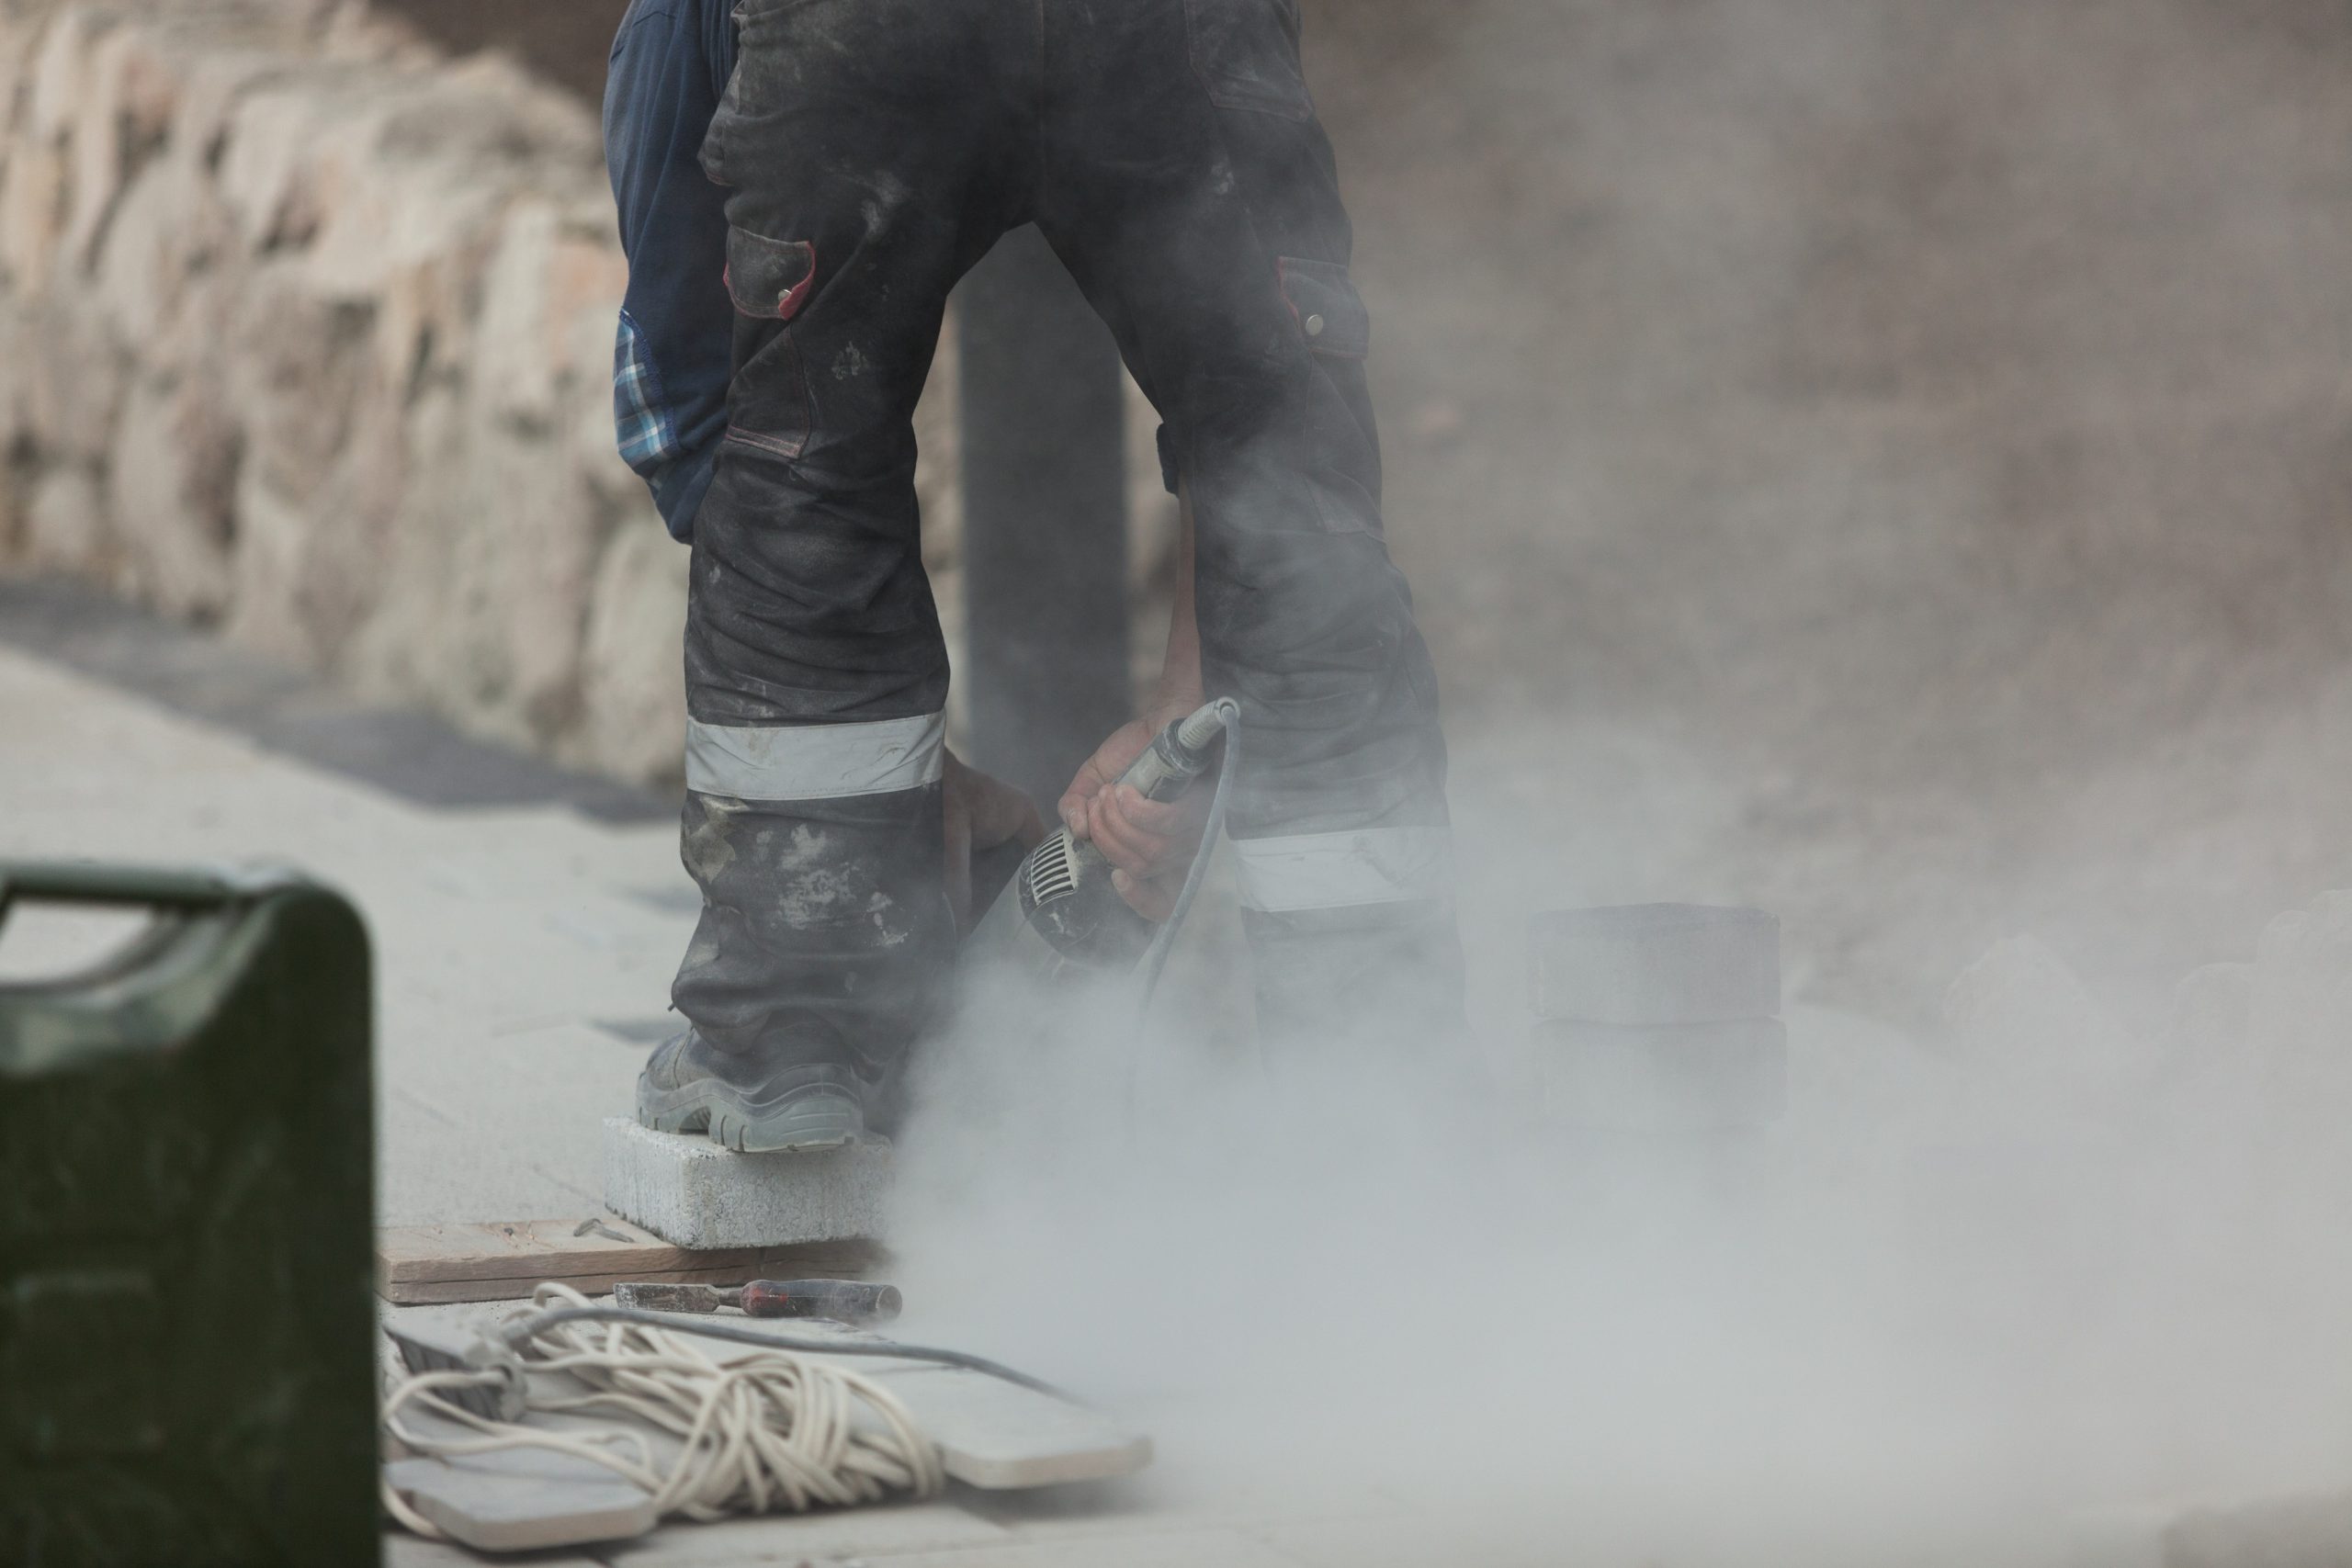 Can Cutting Concrete Sydney Cause Silicosis